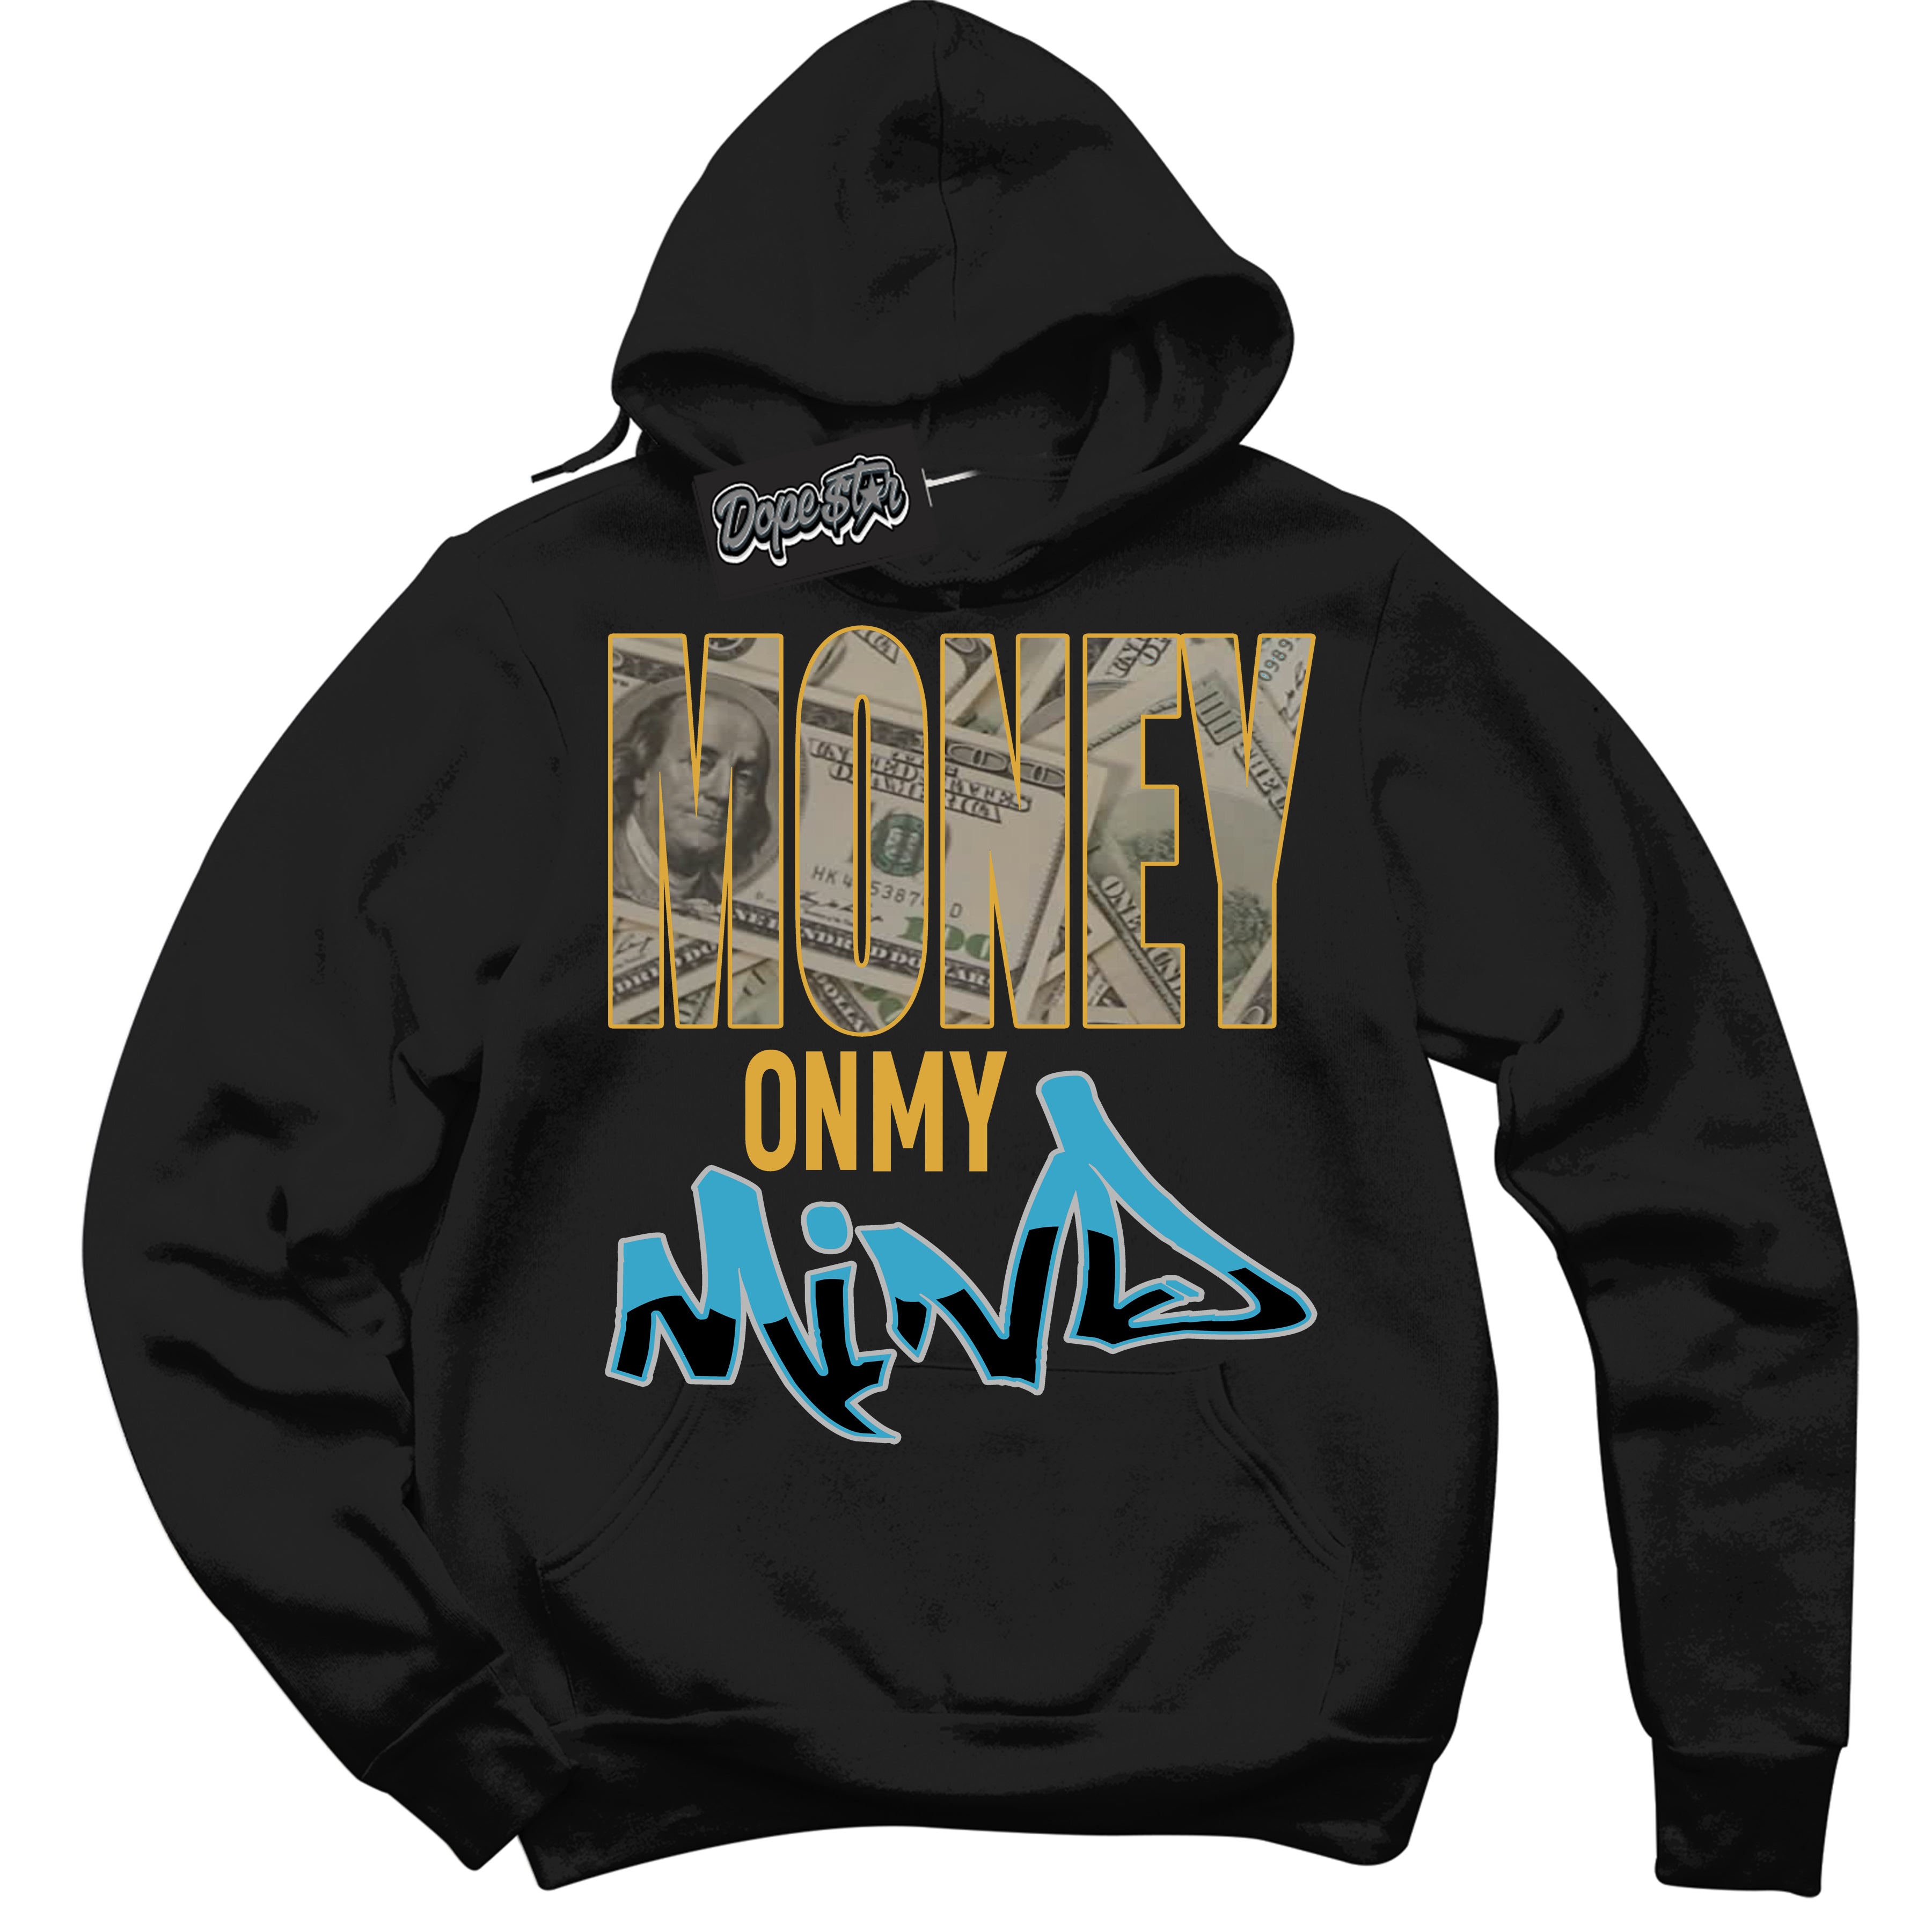 Cool Black Hoodie with “ Money On My Mind ”  design that Perfectly Matches Aqua 5s Sneakers.